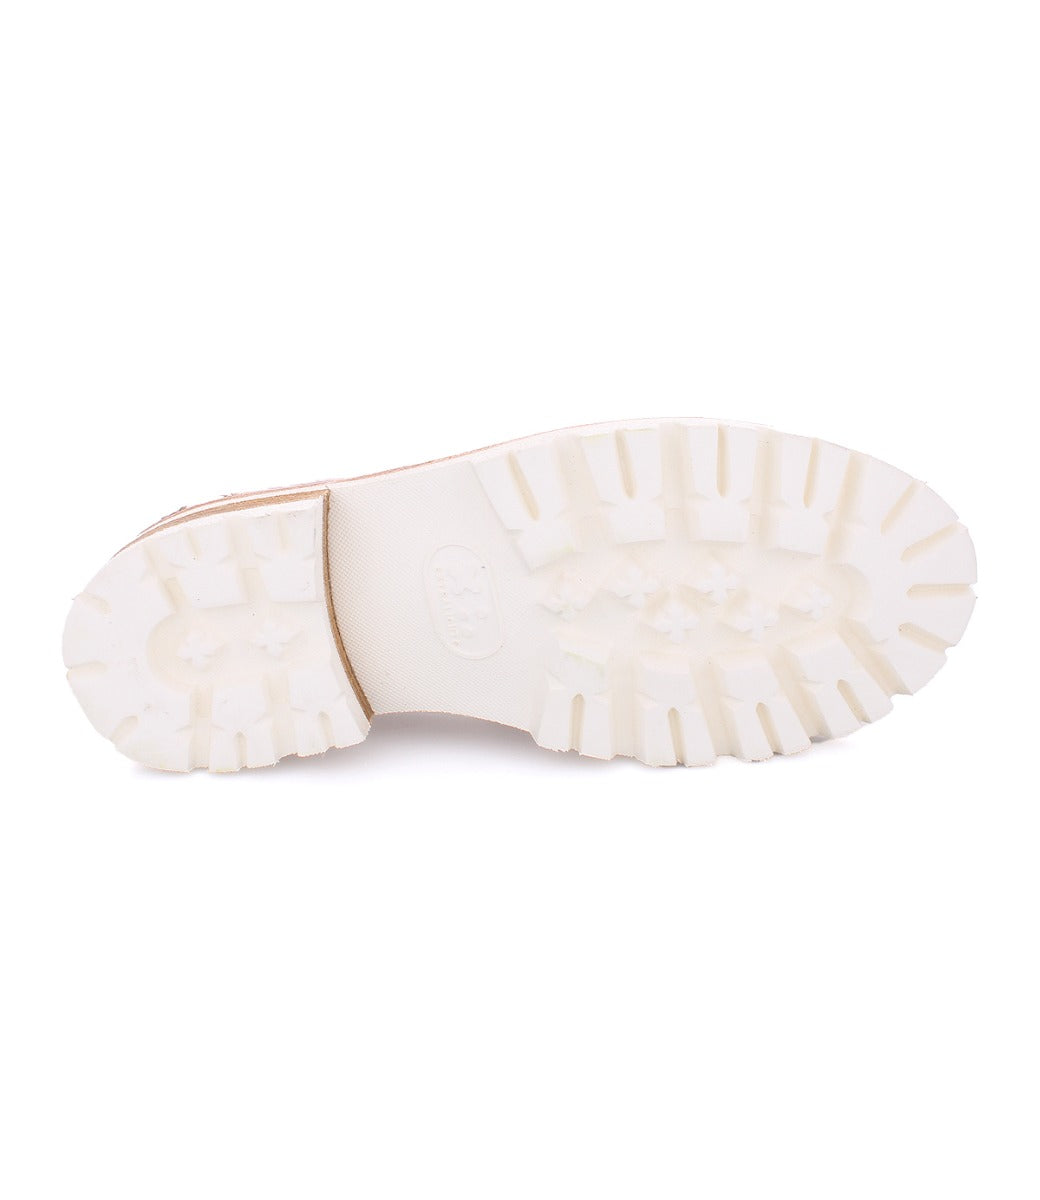 A Reina III shoe with white soles on a white background by Bed Stu.